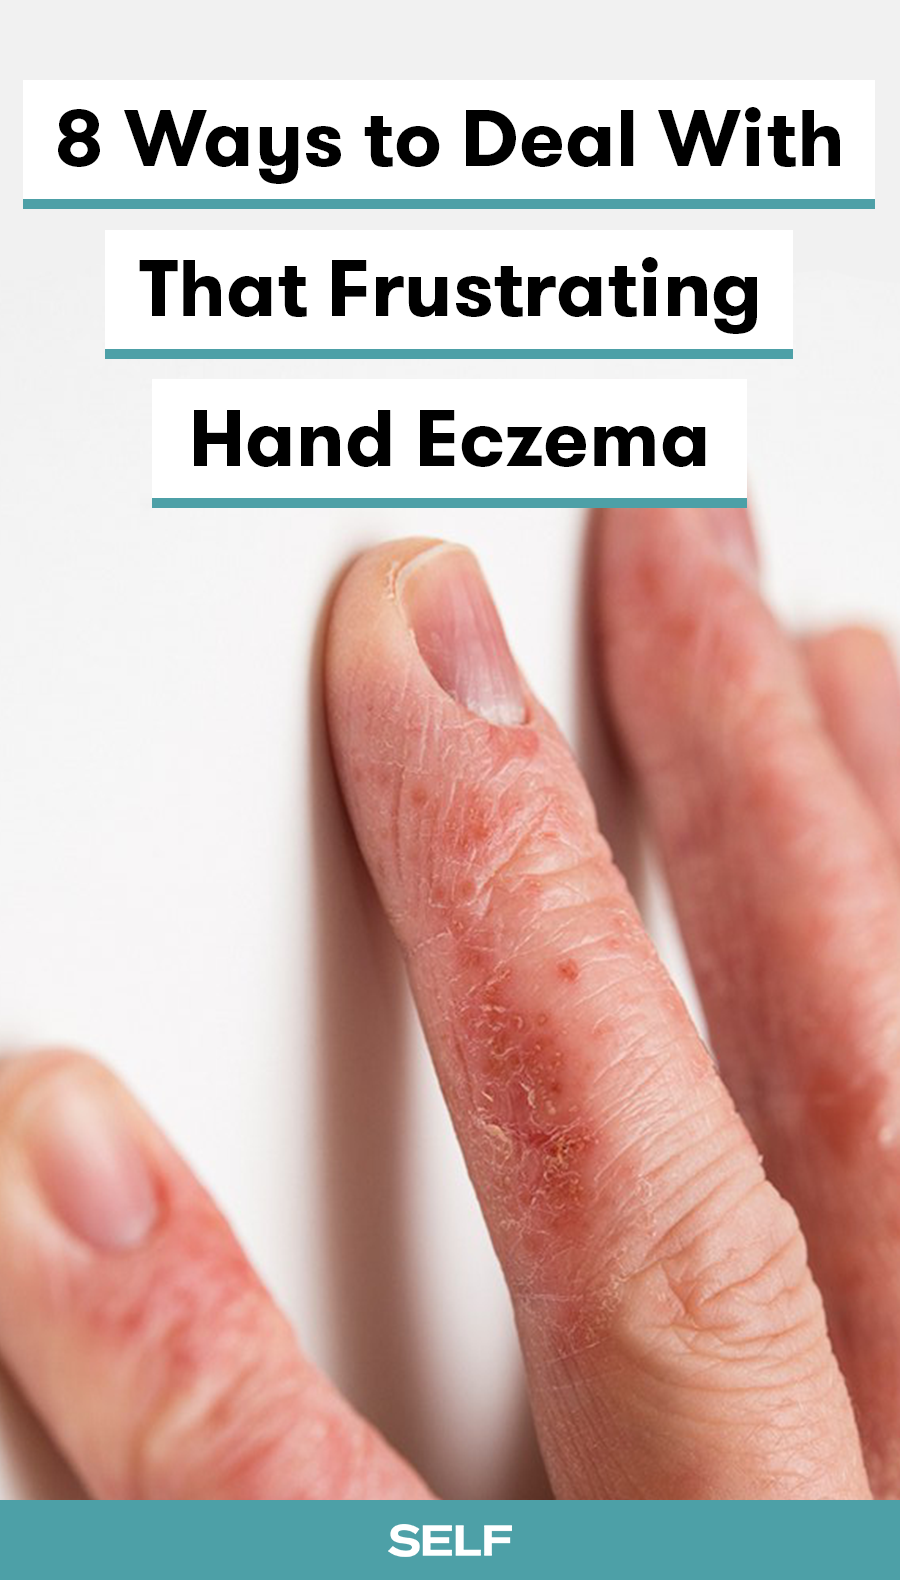 How To Get Rid Of Itchy Rash On Hands â Mednifico.com